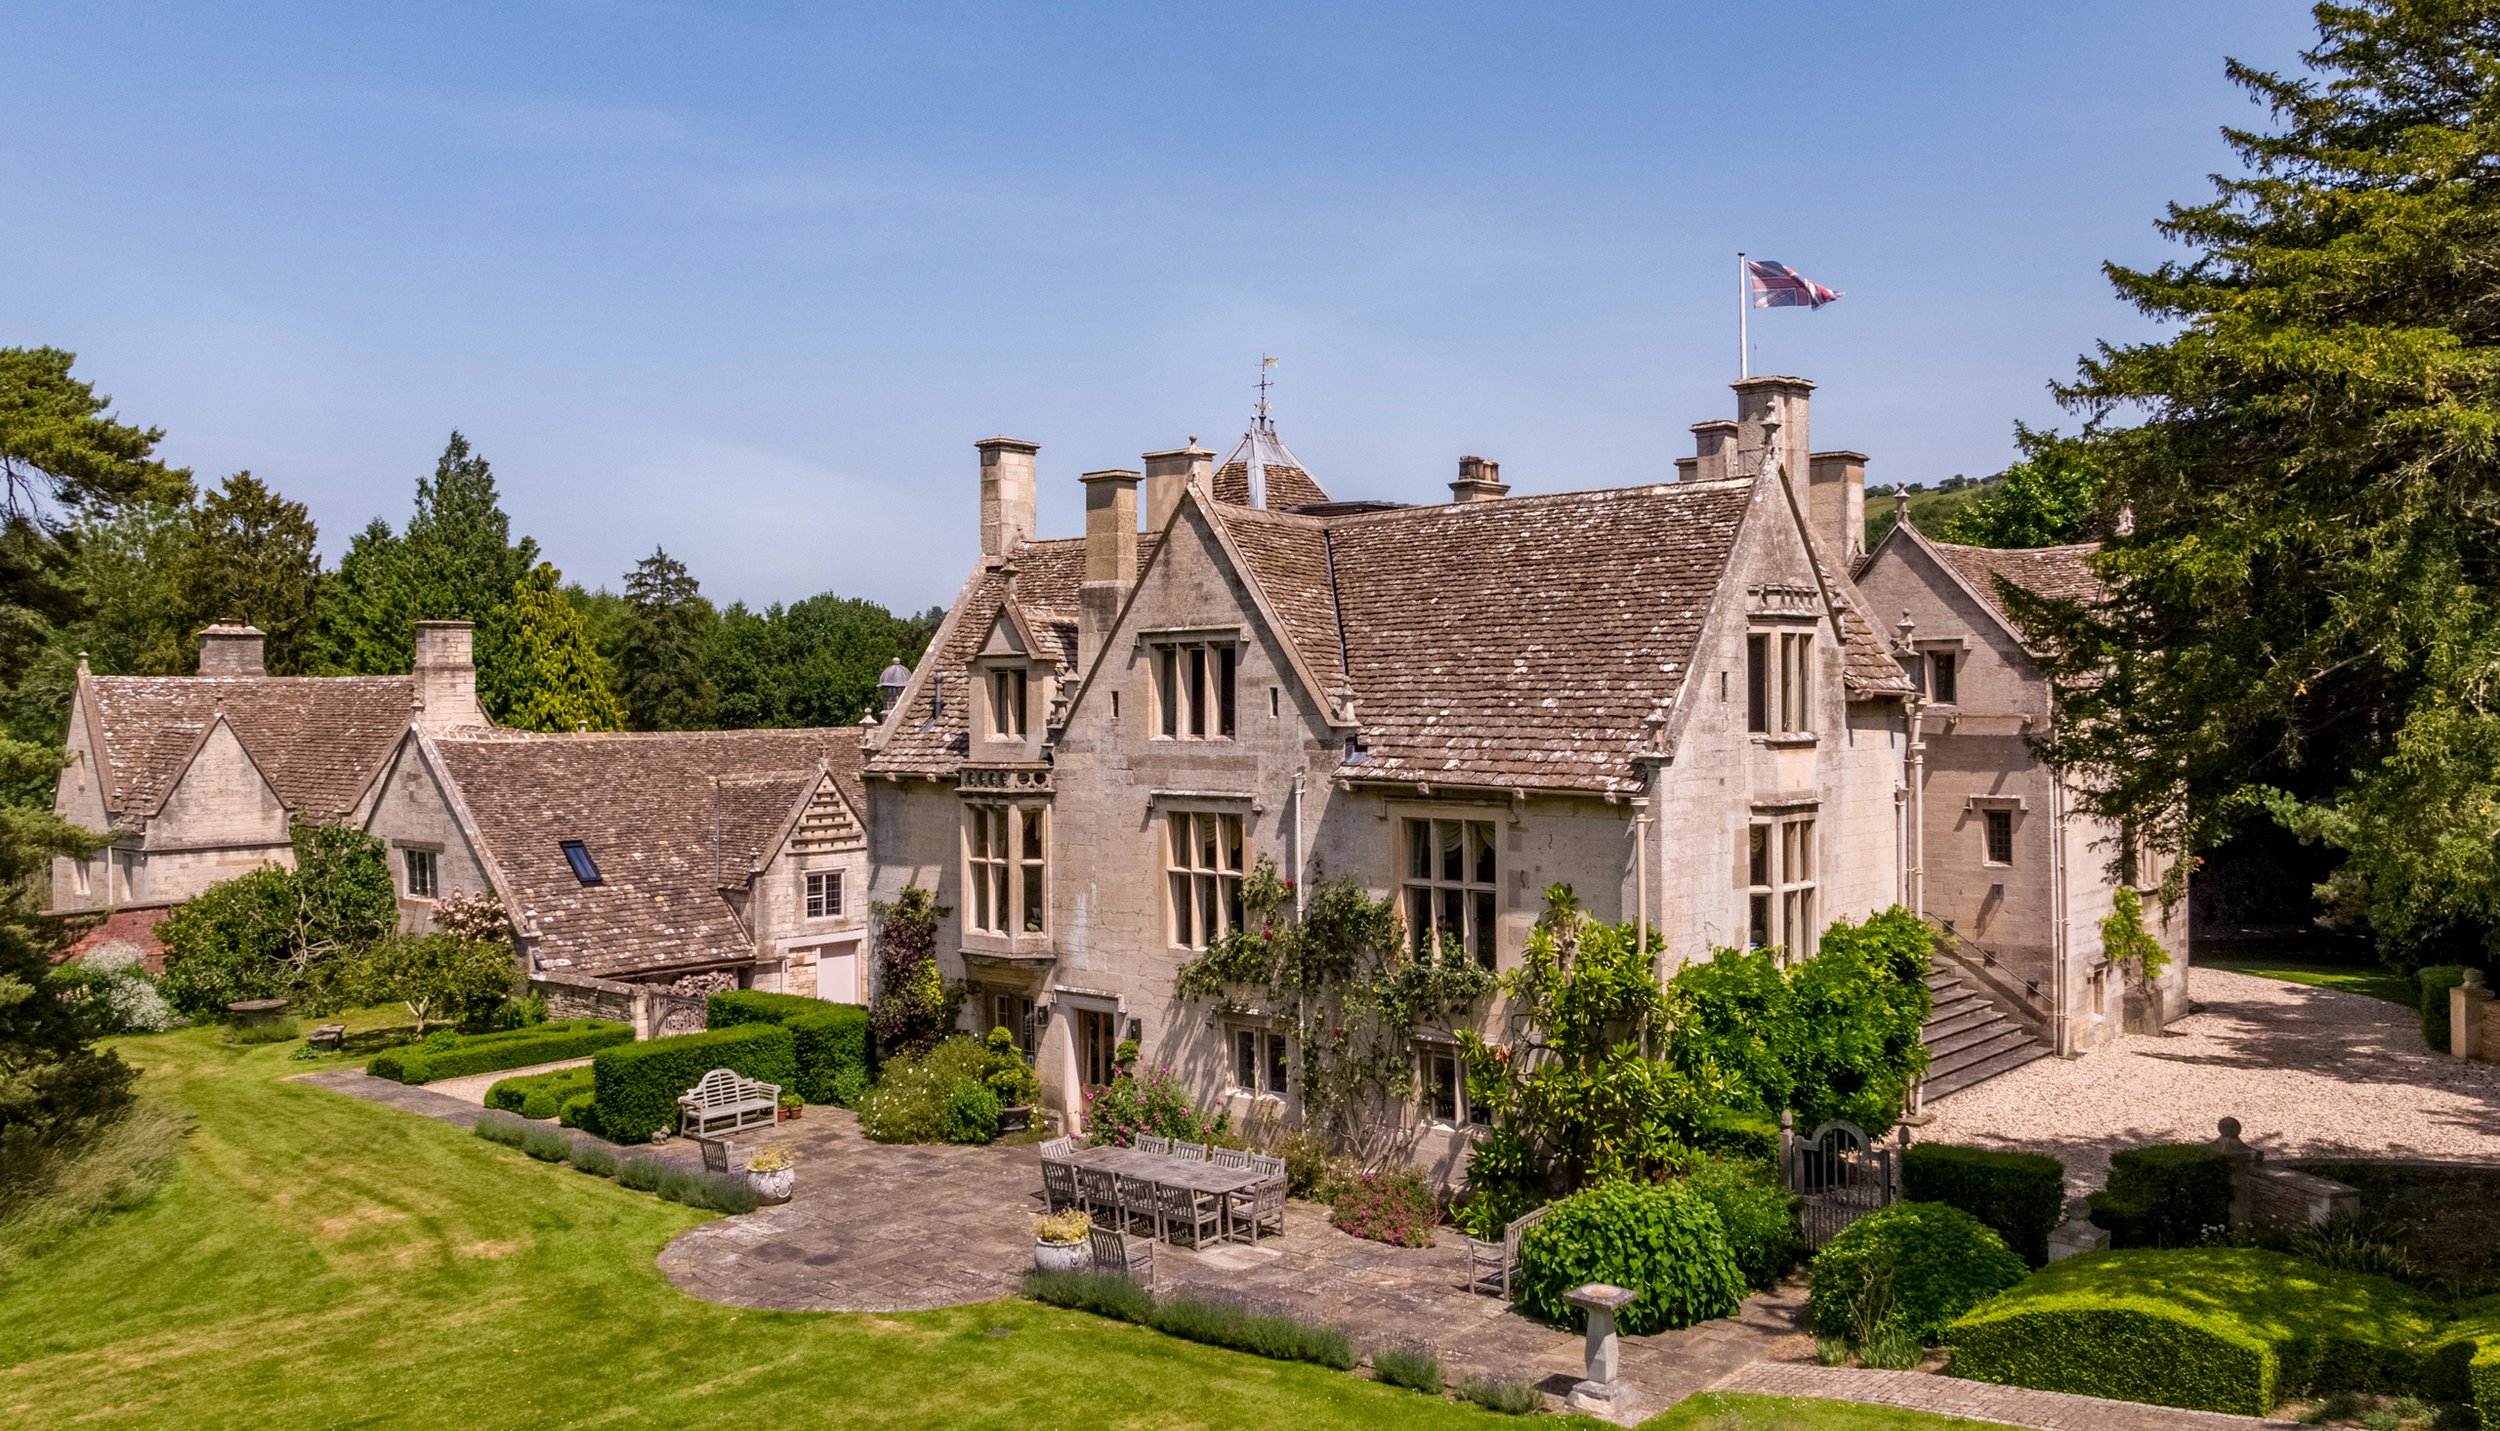 Francis York TCotswolds House Built on the  Site of an Ancient Roman Villa  Savills Bluebook Agency 42.jpg